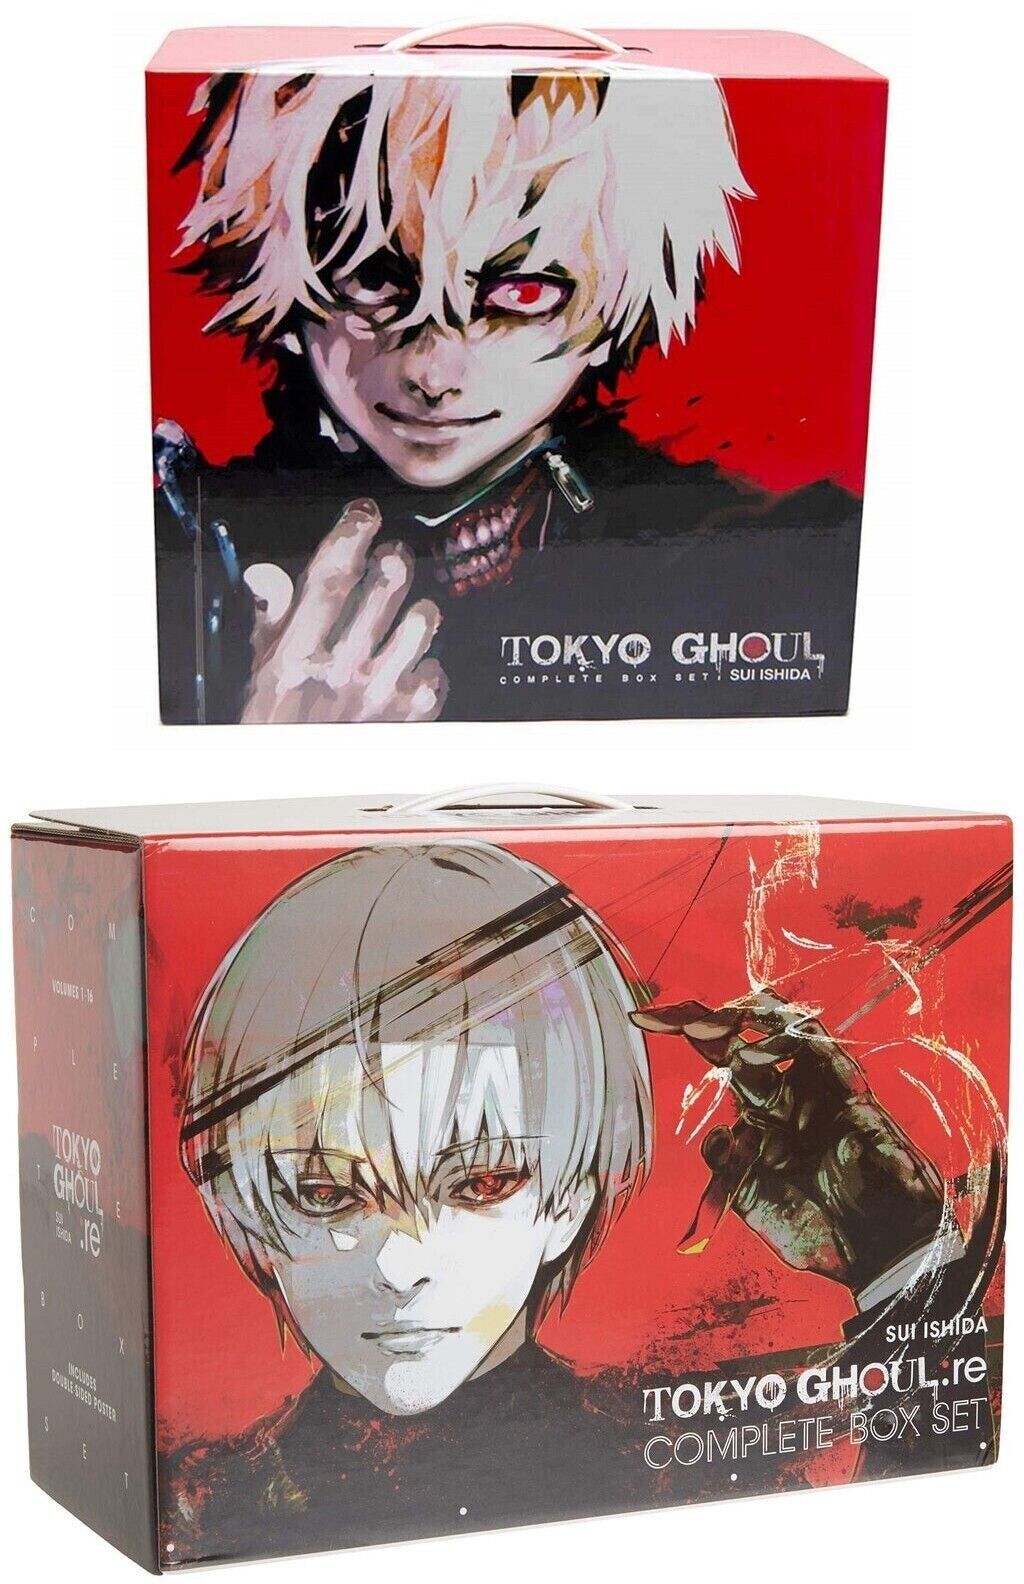 Tokyo Ghoul + Re Complete Manga Box Sets Brand New Mint Sealed 30 Volumes Total